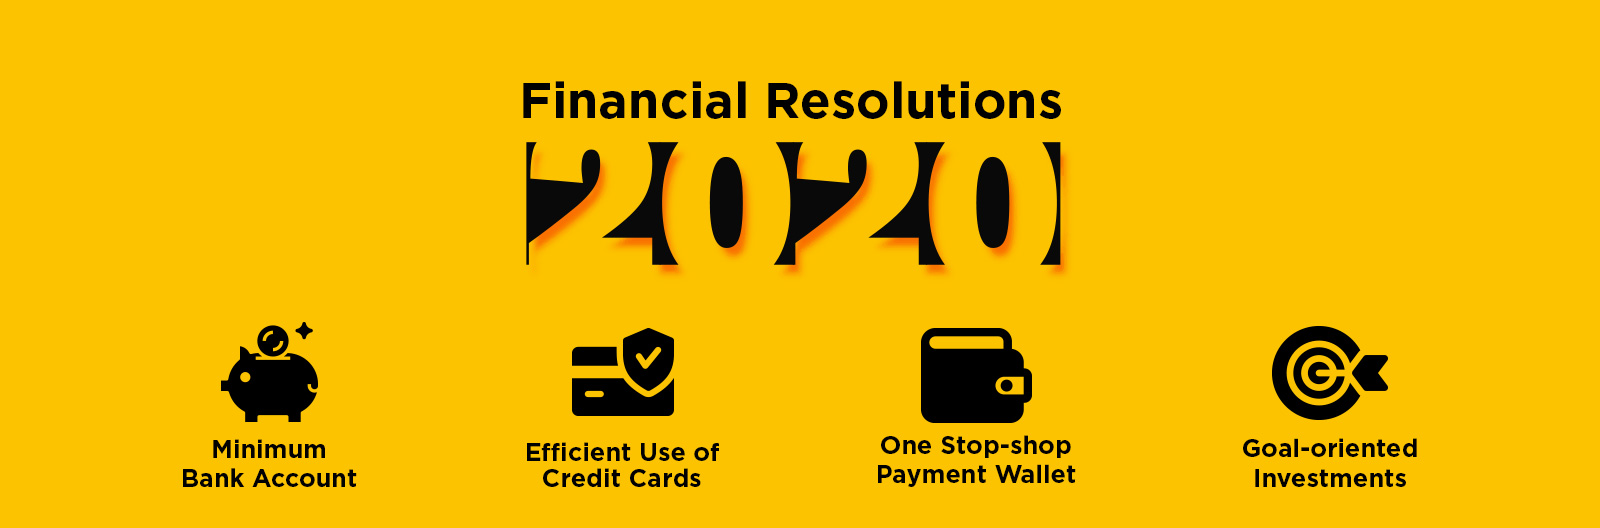 financial resolutions for 2020